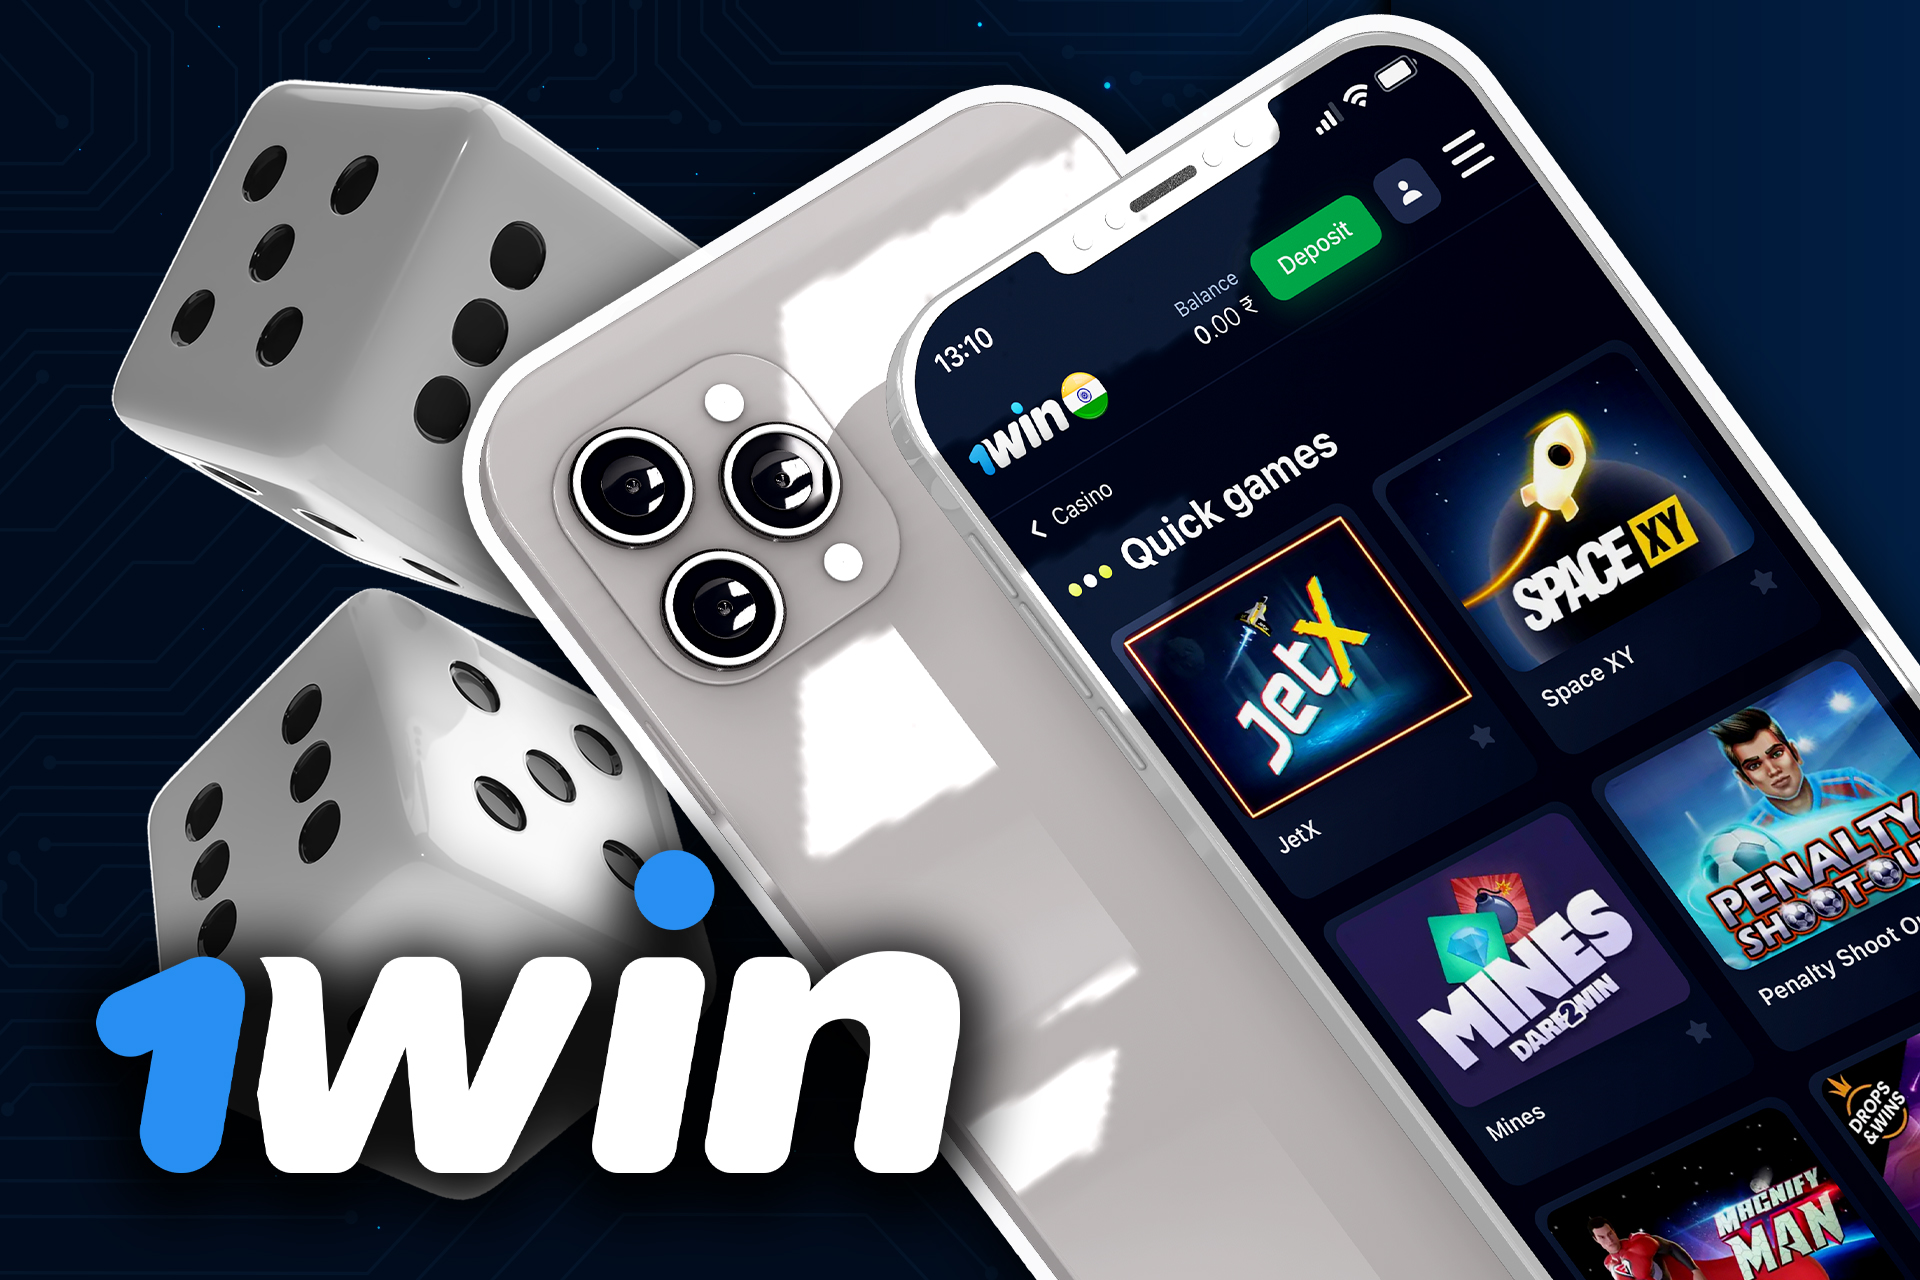 Play the 1win casino games right on your smartphone.